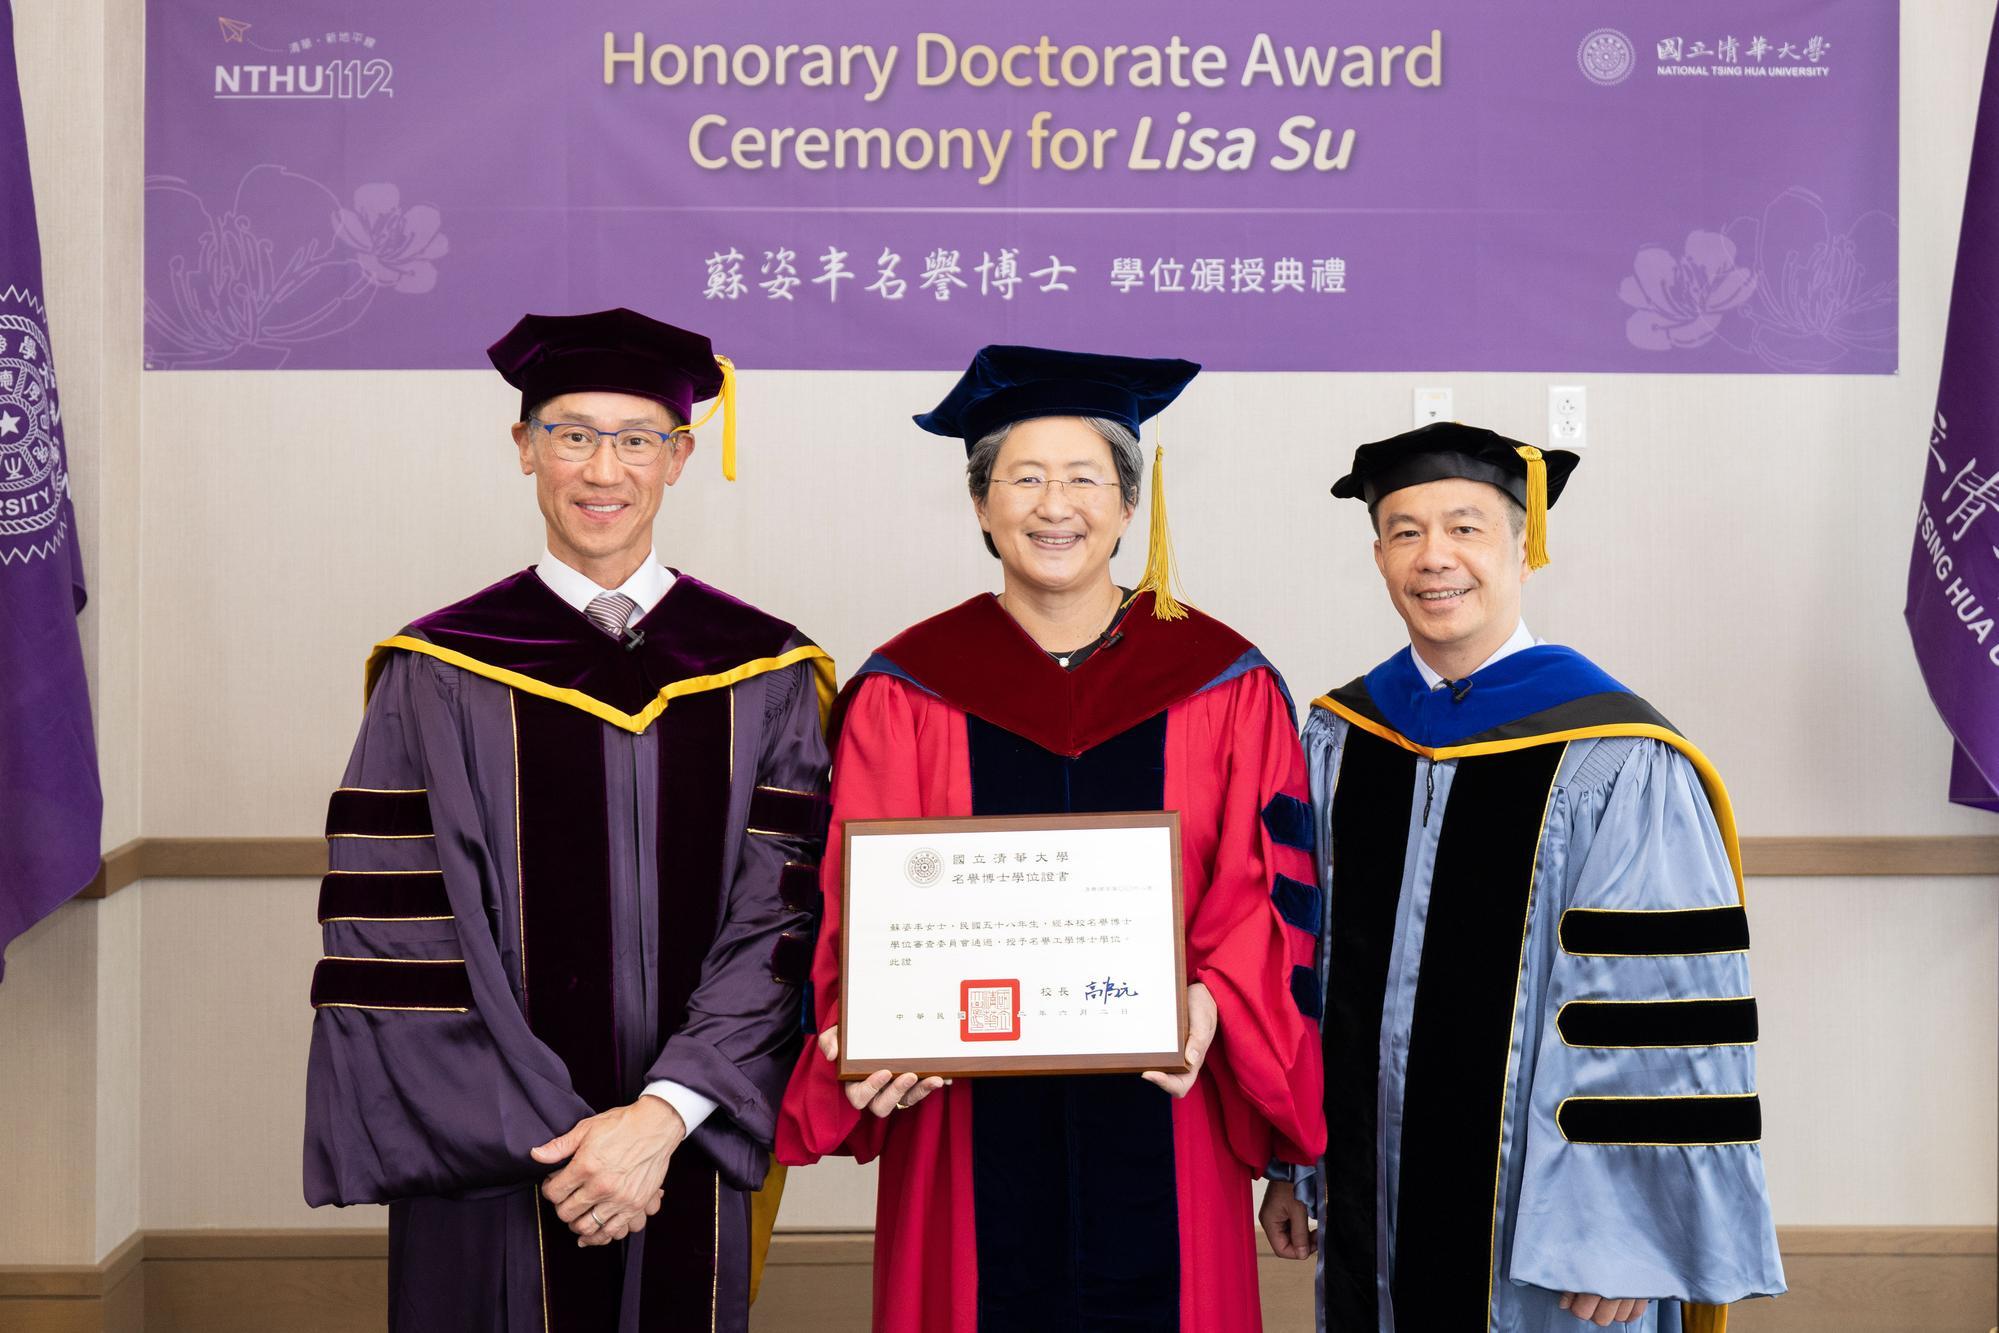 NTHU President W. John Kao (高為元) (left) and Dean Shawn Shuo-Hung Hsu (徐碩鴻) (middle) of the College of Electrical and Computer Science flew to the United States to confer the honorary doctorate degree upon Lisa Su (蘇姿丰).  